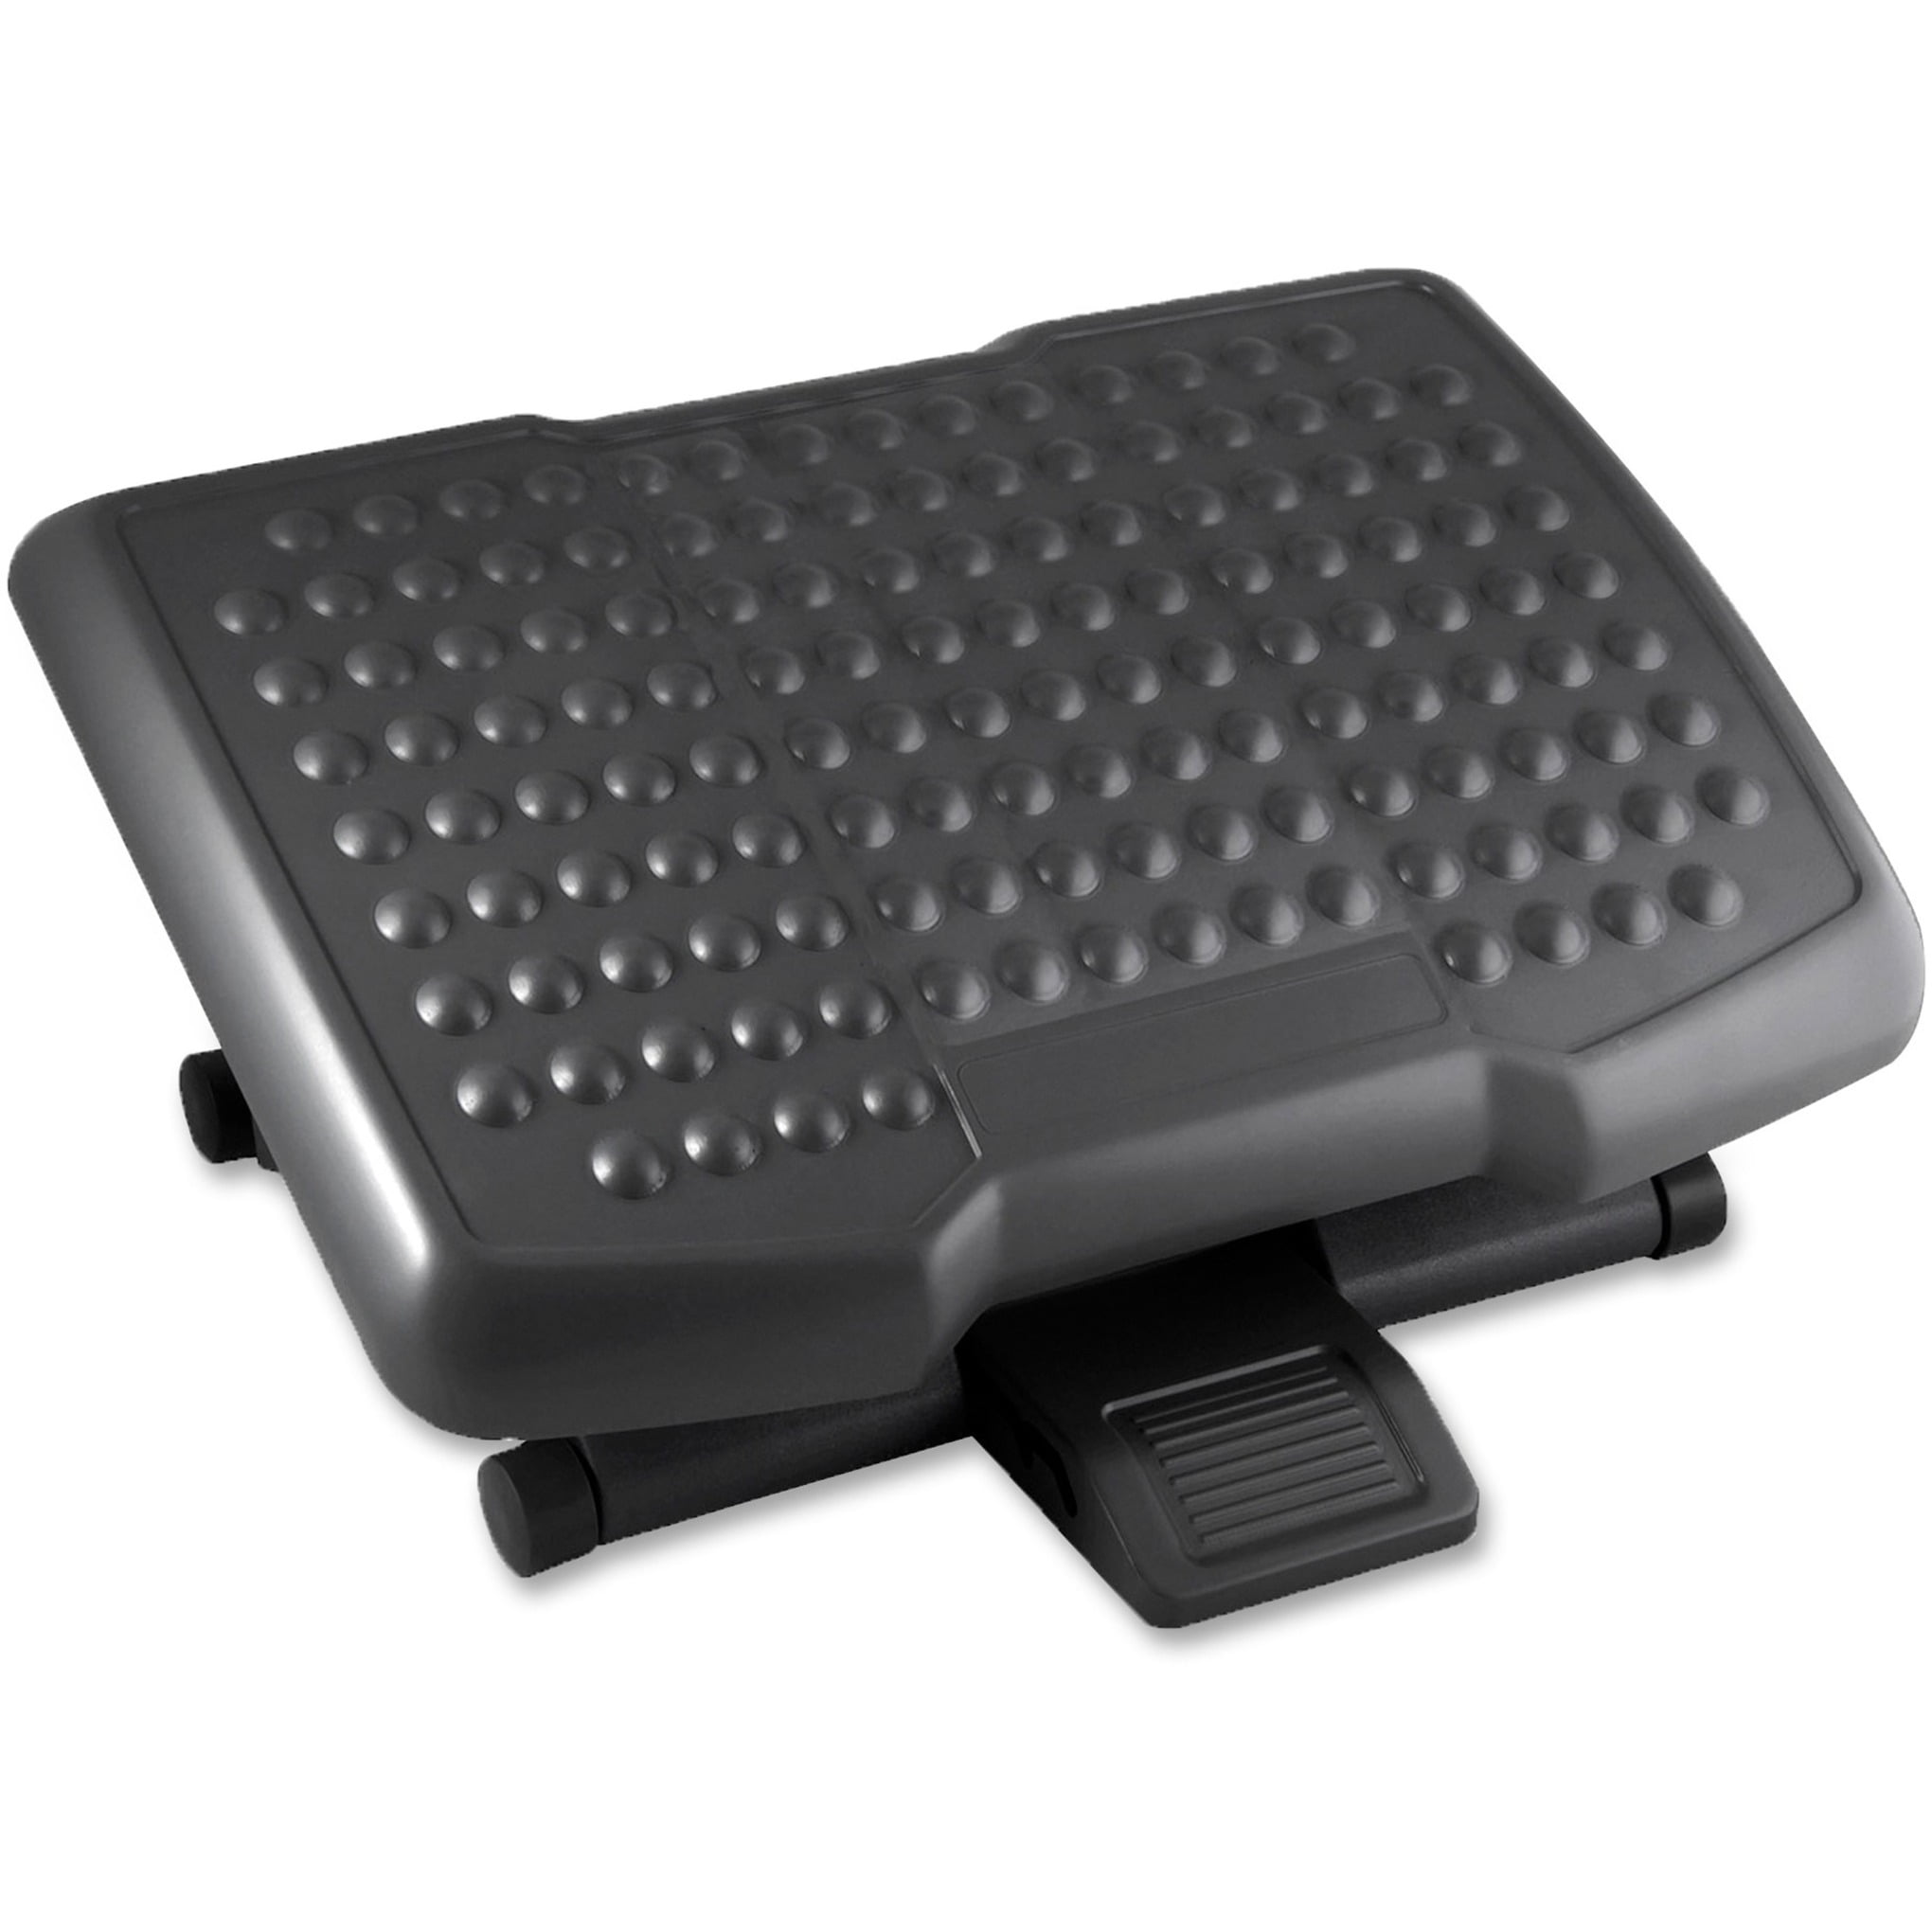 Black with Adjustable Angle in 3 Different Height Positions Halter Ergonomic Foot Rest 